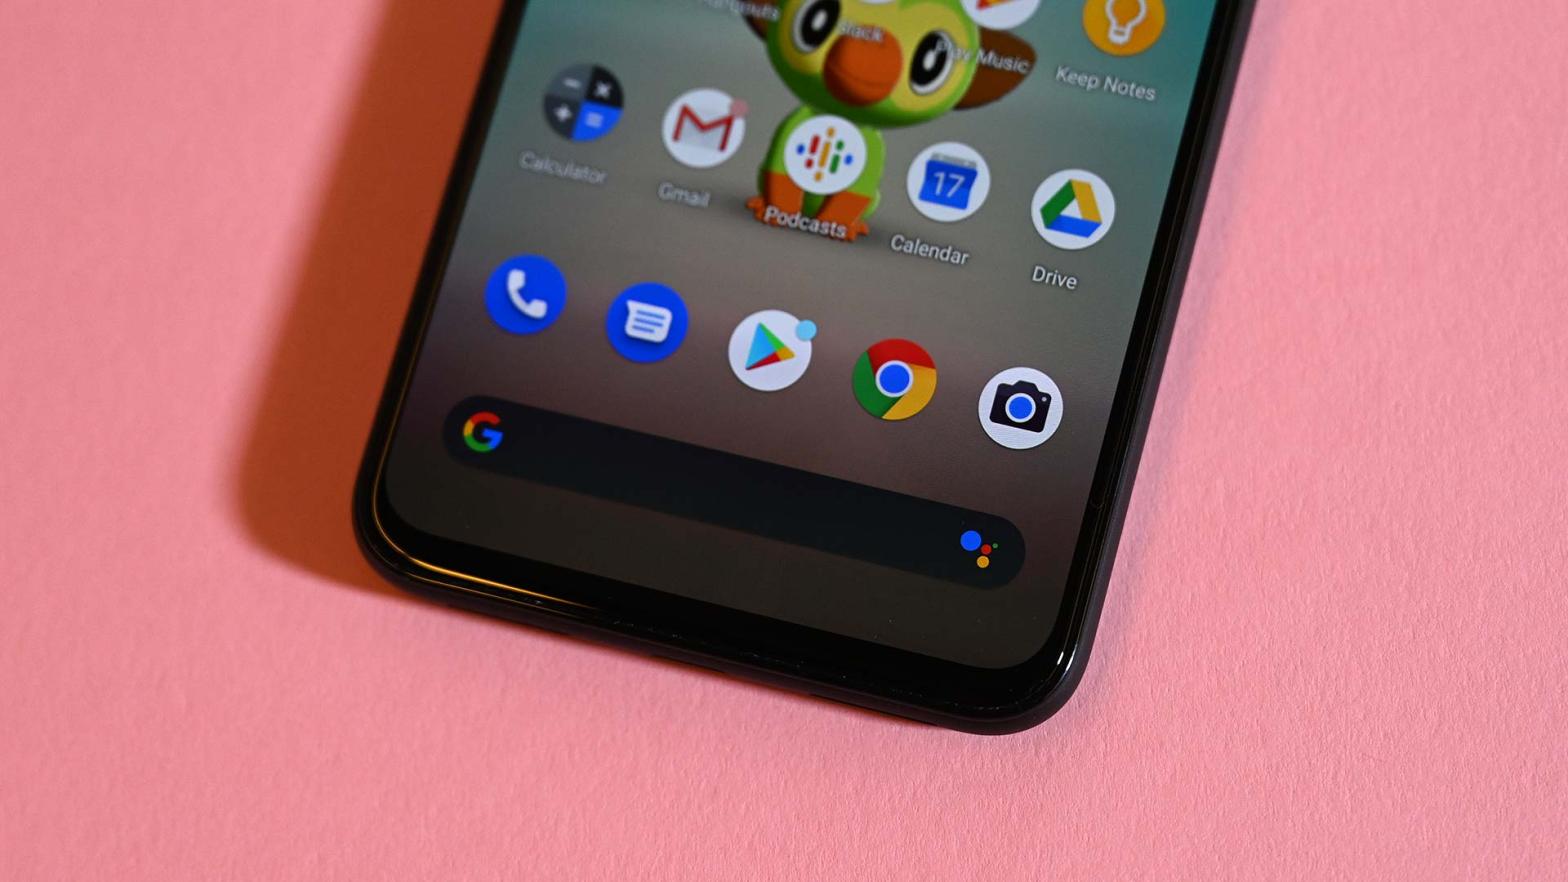 A file-sharing app that claims it has been downloaded from the Google Play store more than 1 billion times has serious security flaws. (Photo: Sam Rutherford/Gizmodo)